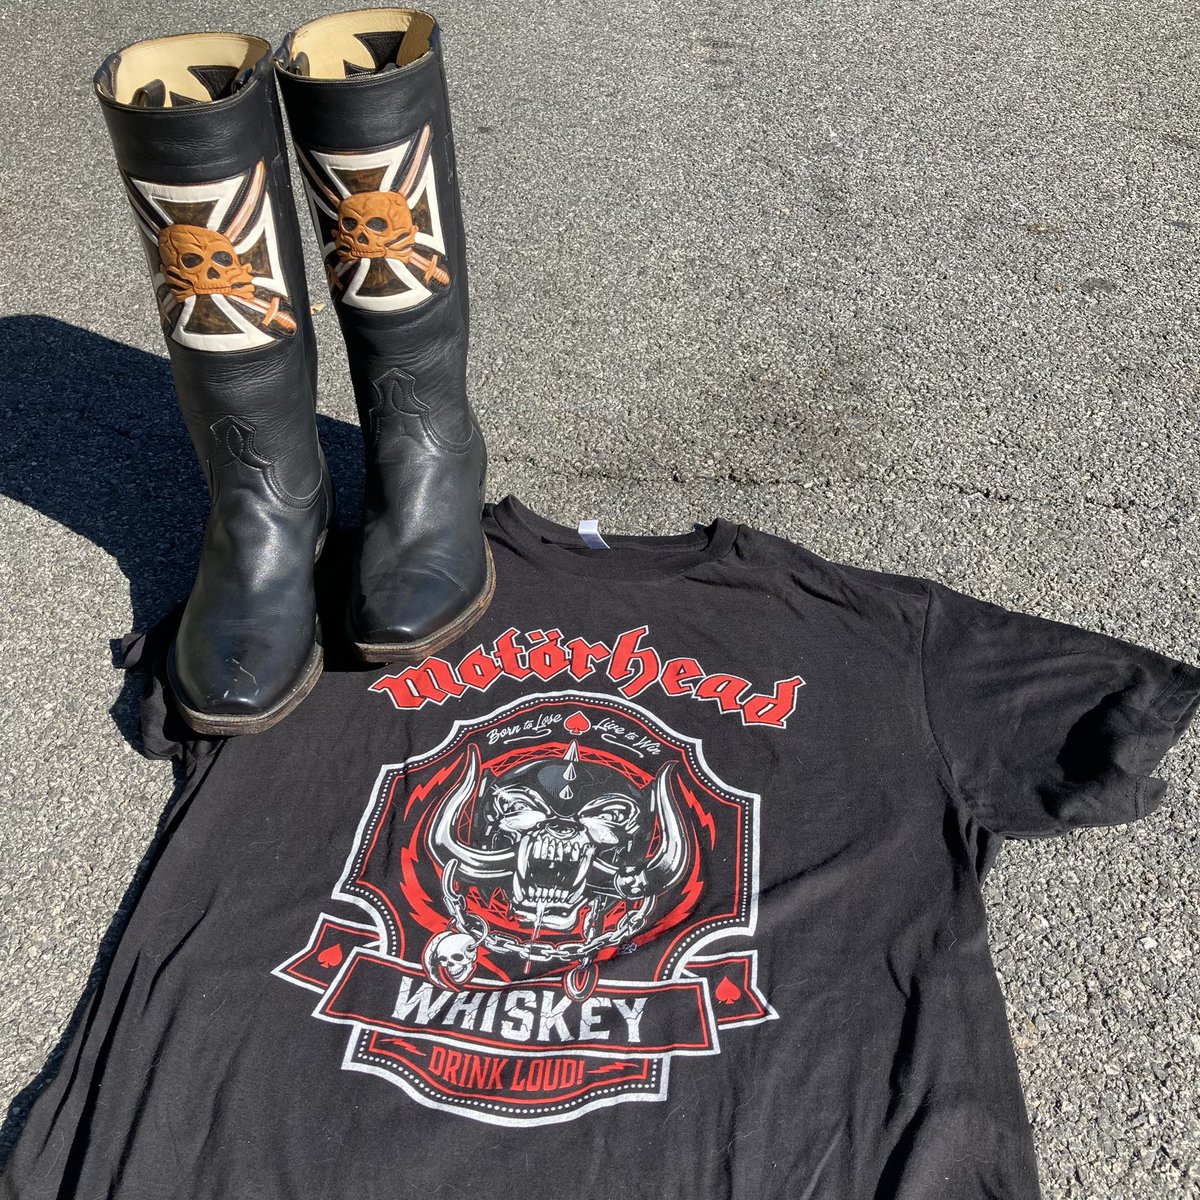 Happy #motorheadmonday everyone. Thanks to @drinkmotorhead for the cool shirt. Here with mister Kilmister s boots. Raise your glasses and drink loud. #cowboyboots #motorhead #customboots #rocknroll